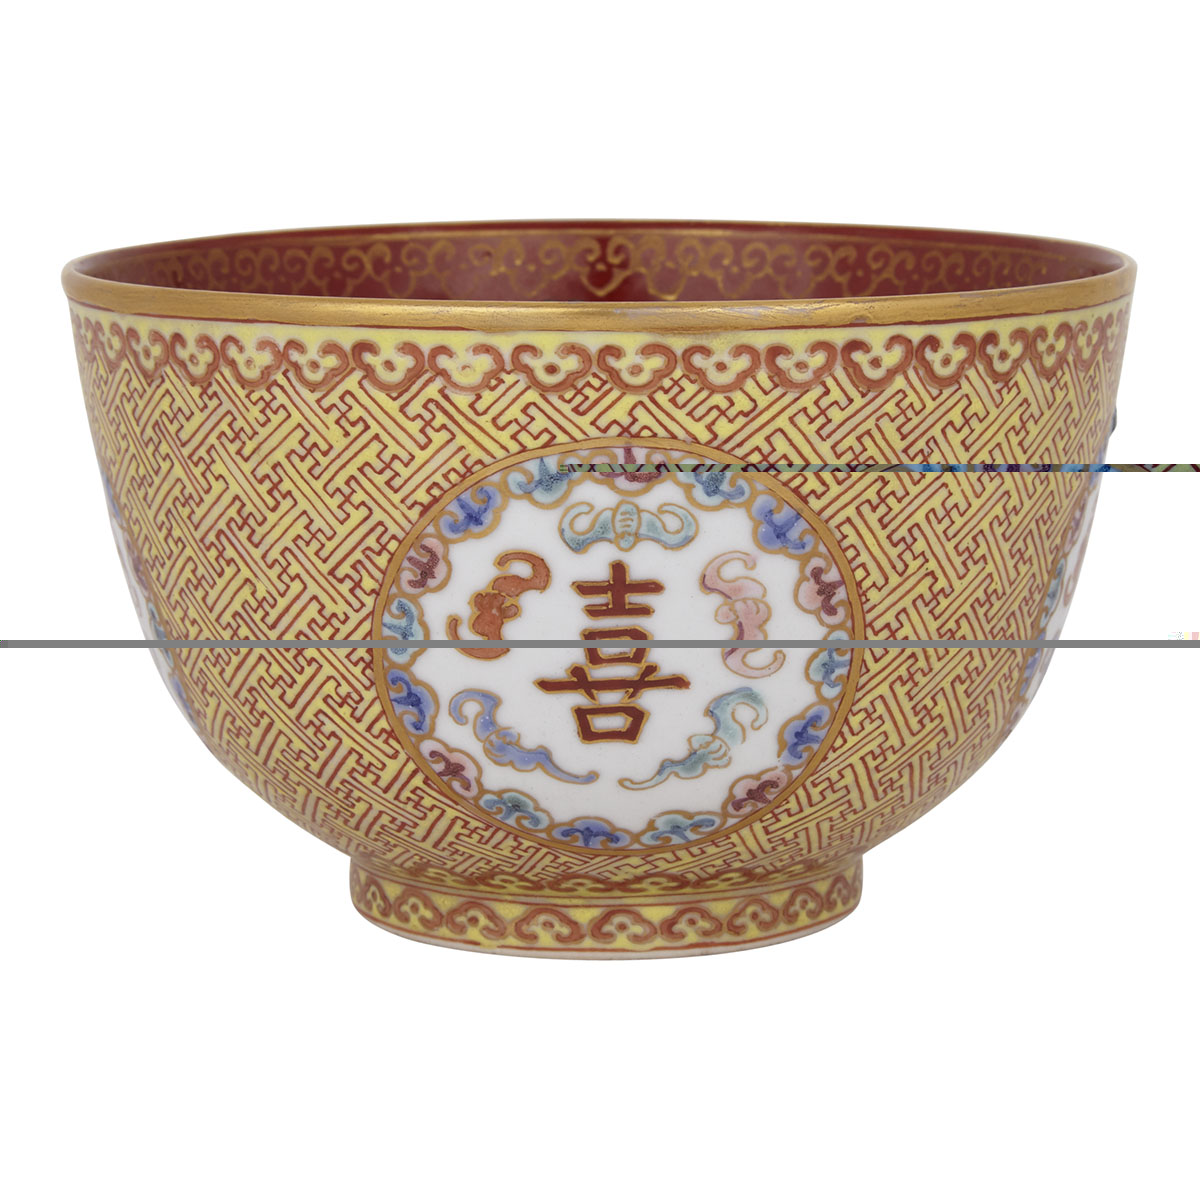 Famille Rose Wan Fu Bowl, Late Qing Dynasty